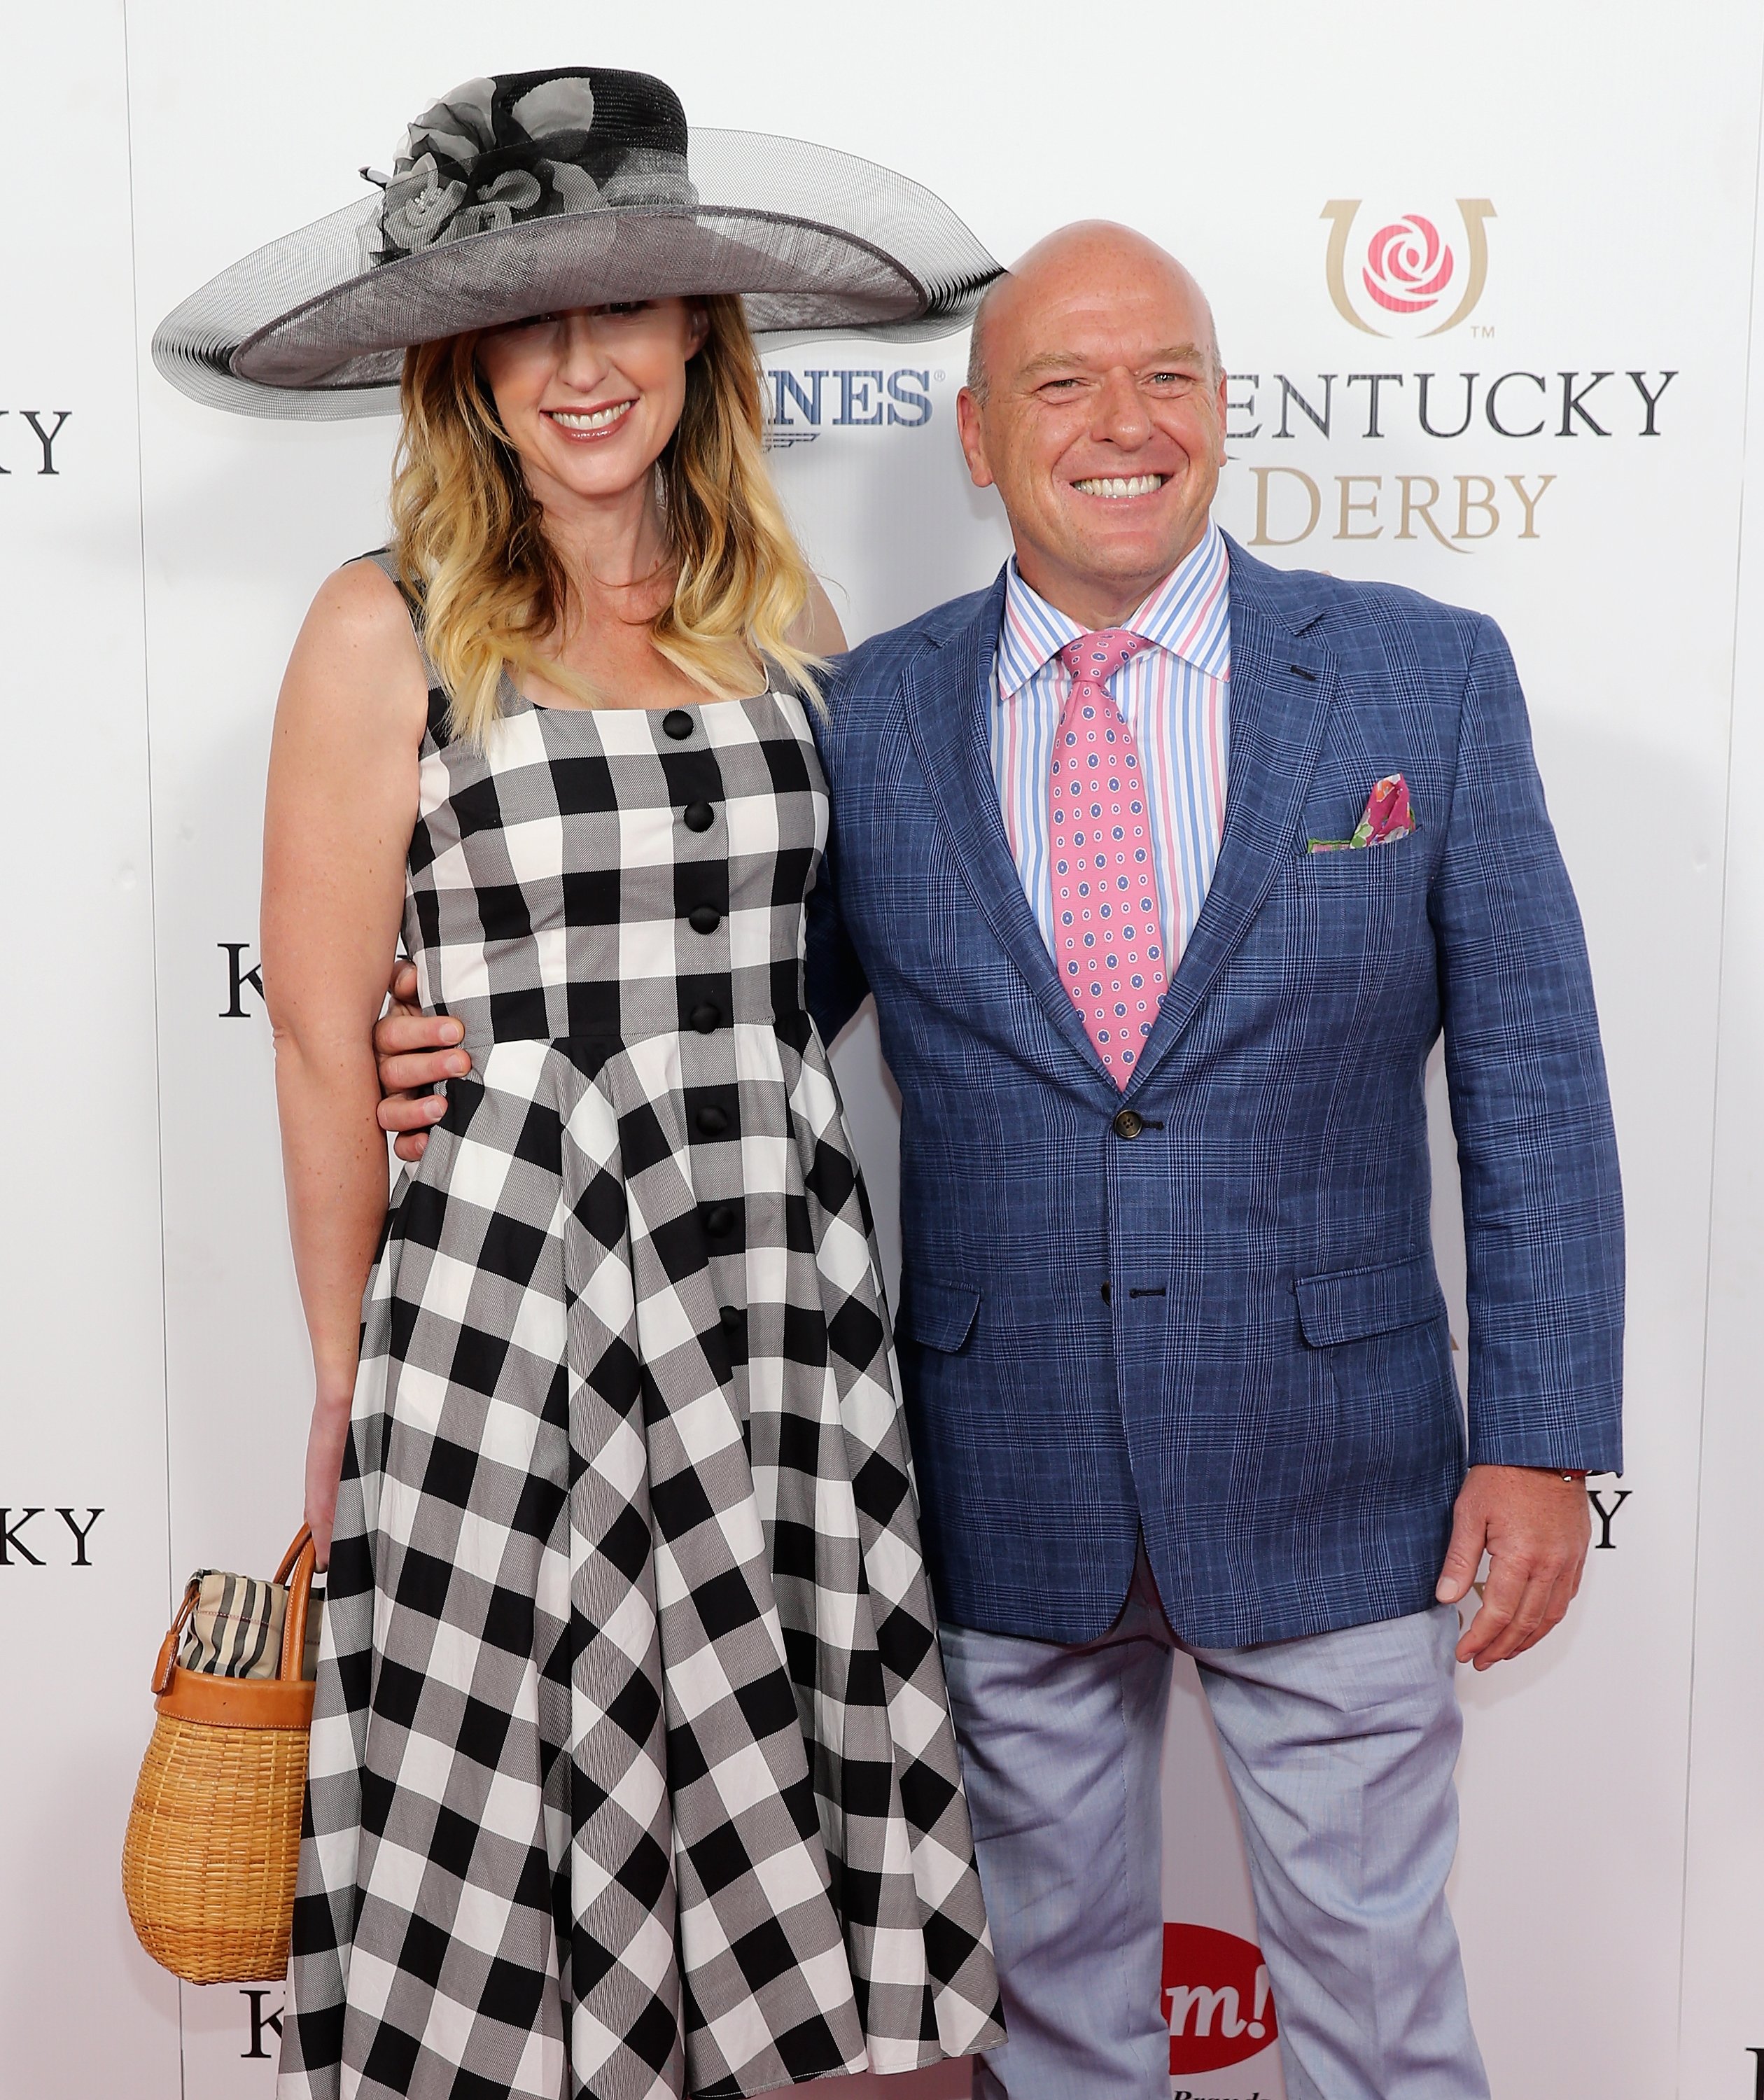 Bridget Norris and Dean Norris are photographed at the 141st Kentucky Derby at Churchill Downs on May 2, 2015, in Louisville, Kentucky | Source: Getty Images